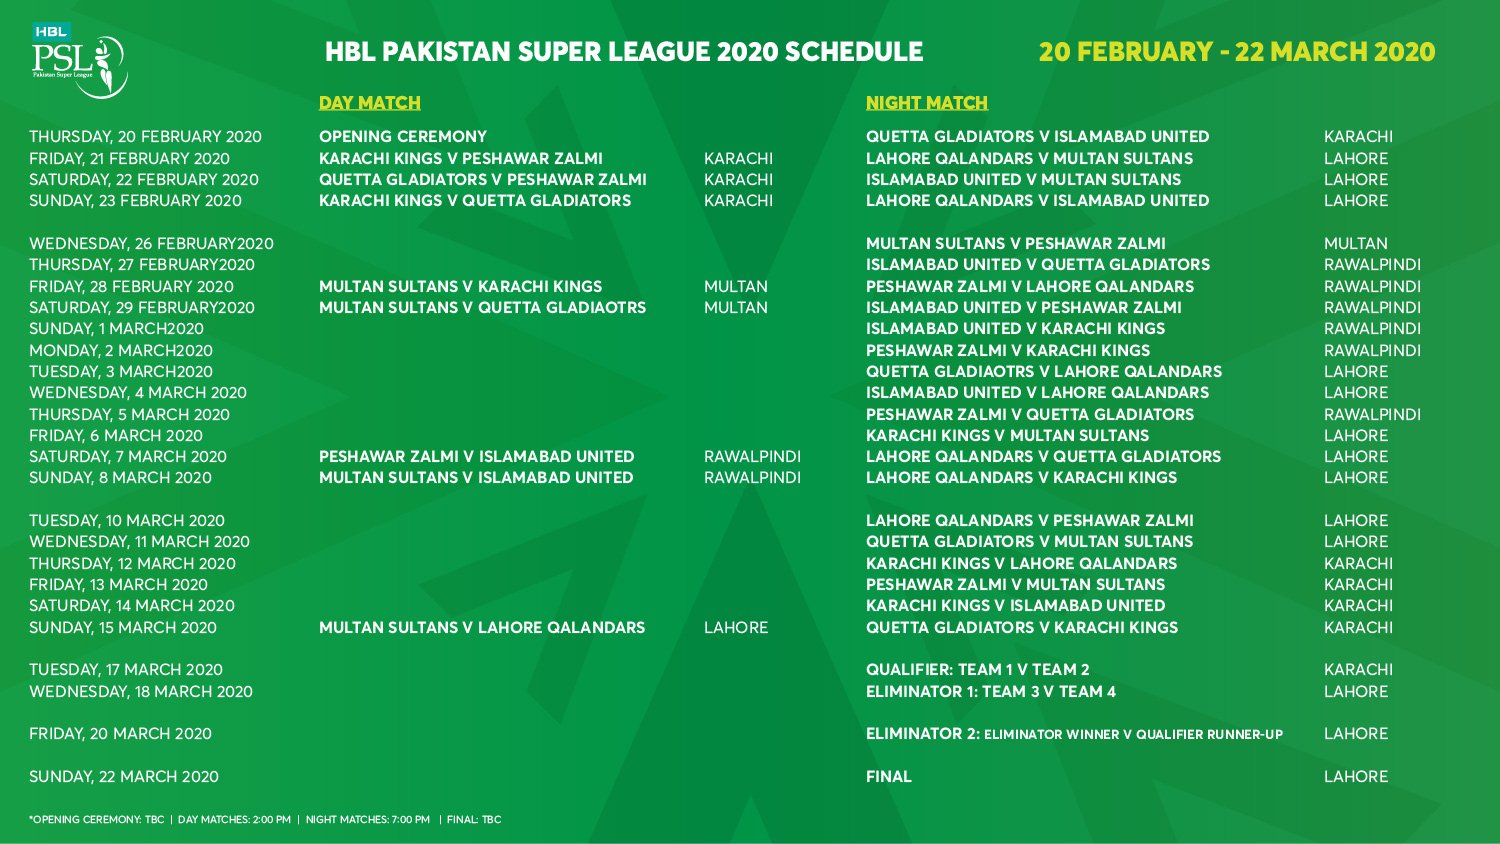 With 50 days to go, PCB announces HBL PSL 2020 schedule Press Release